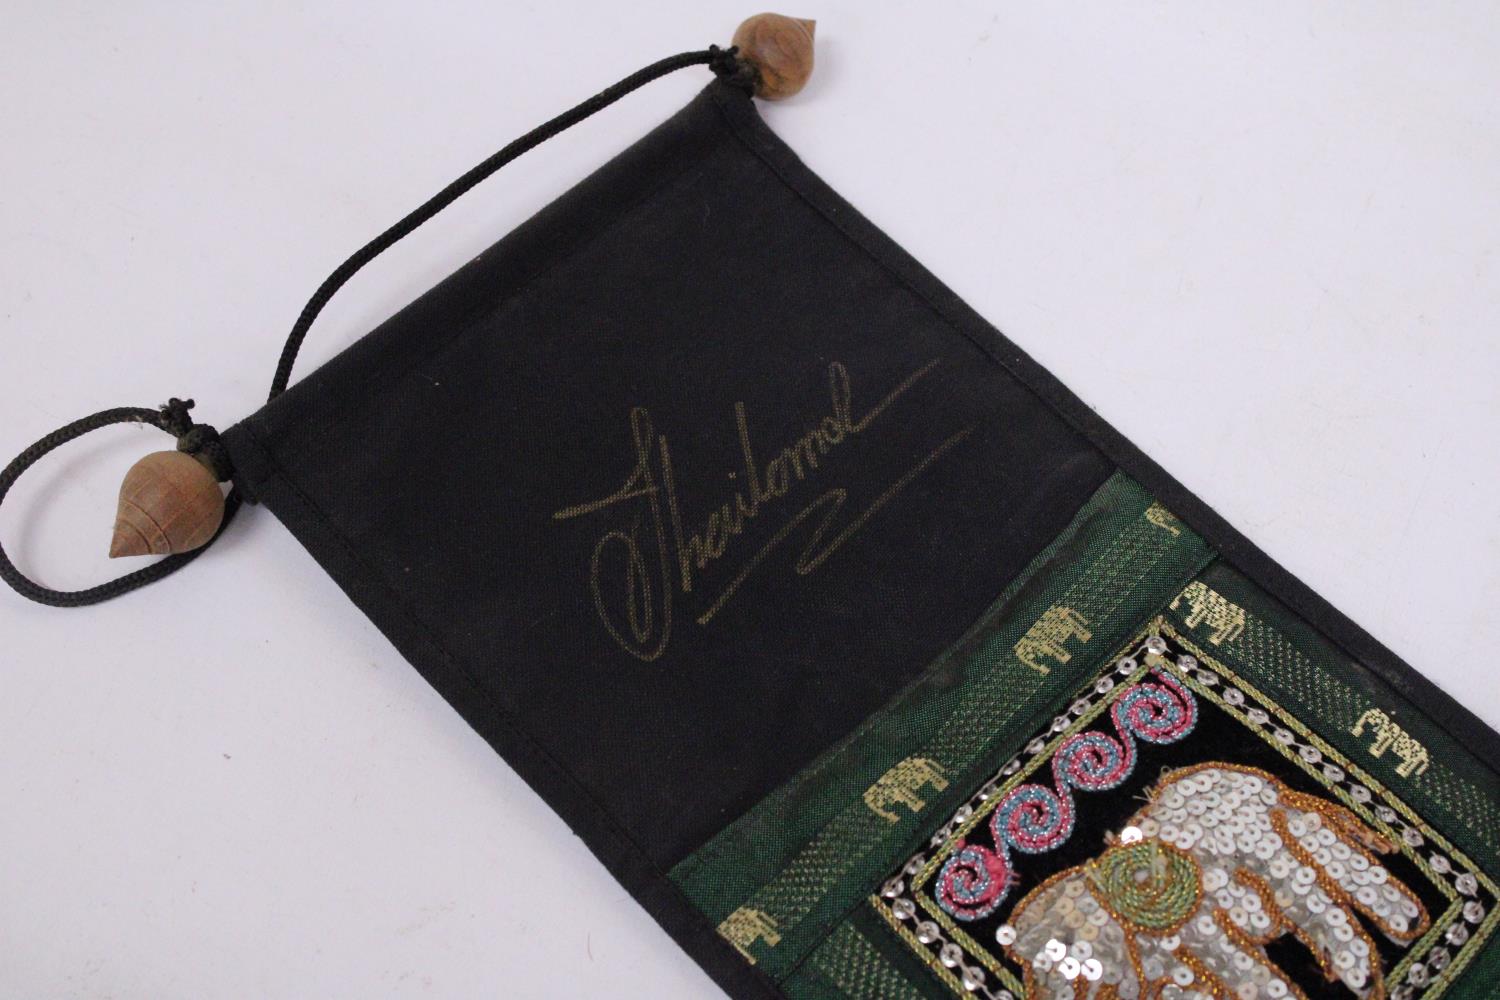 A VINTAGE THAI FABRIC WALL HANGING THREE POCKET ORGANIZER WITH ELEPHANT DECORATION - Image 3 of 4